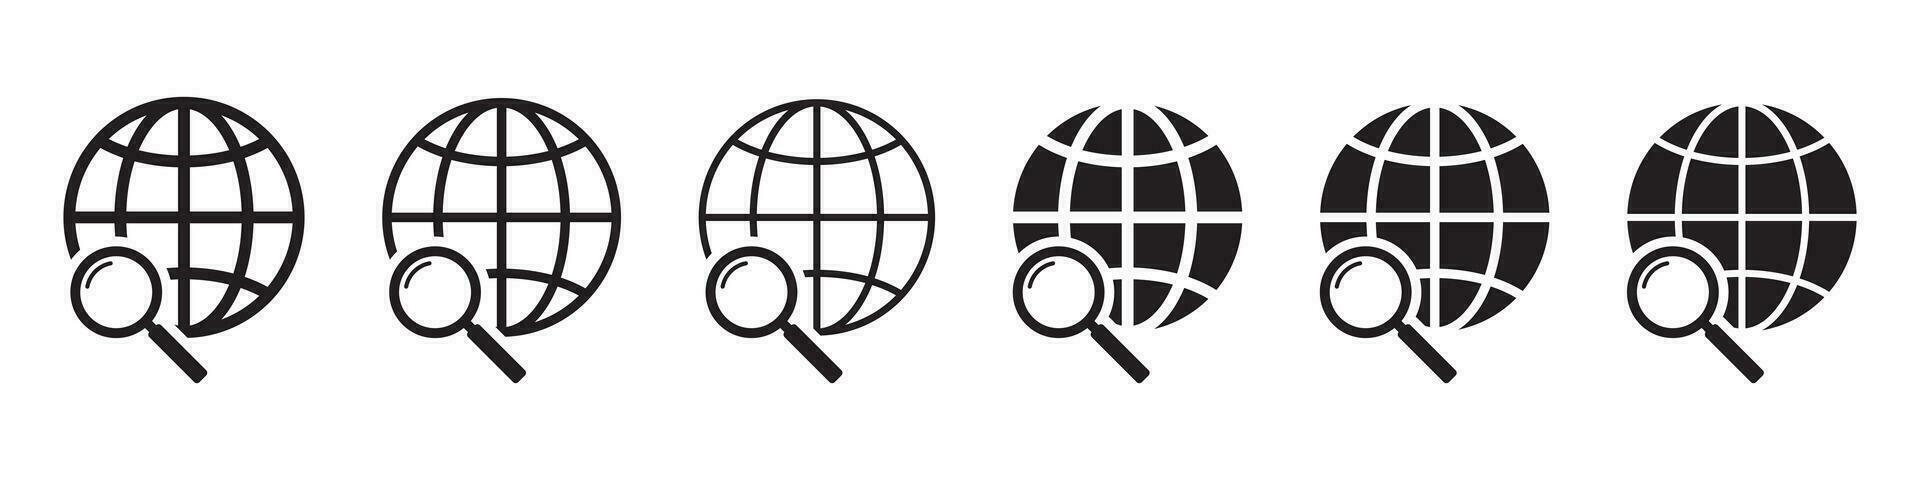 Magnifier and globe icon, search for a place on a map or on the globe icon. The icon of the magnifying glass and planet Earth. vector